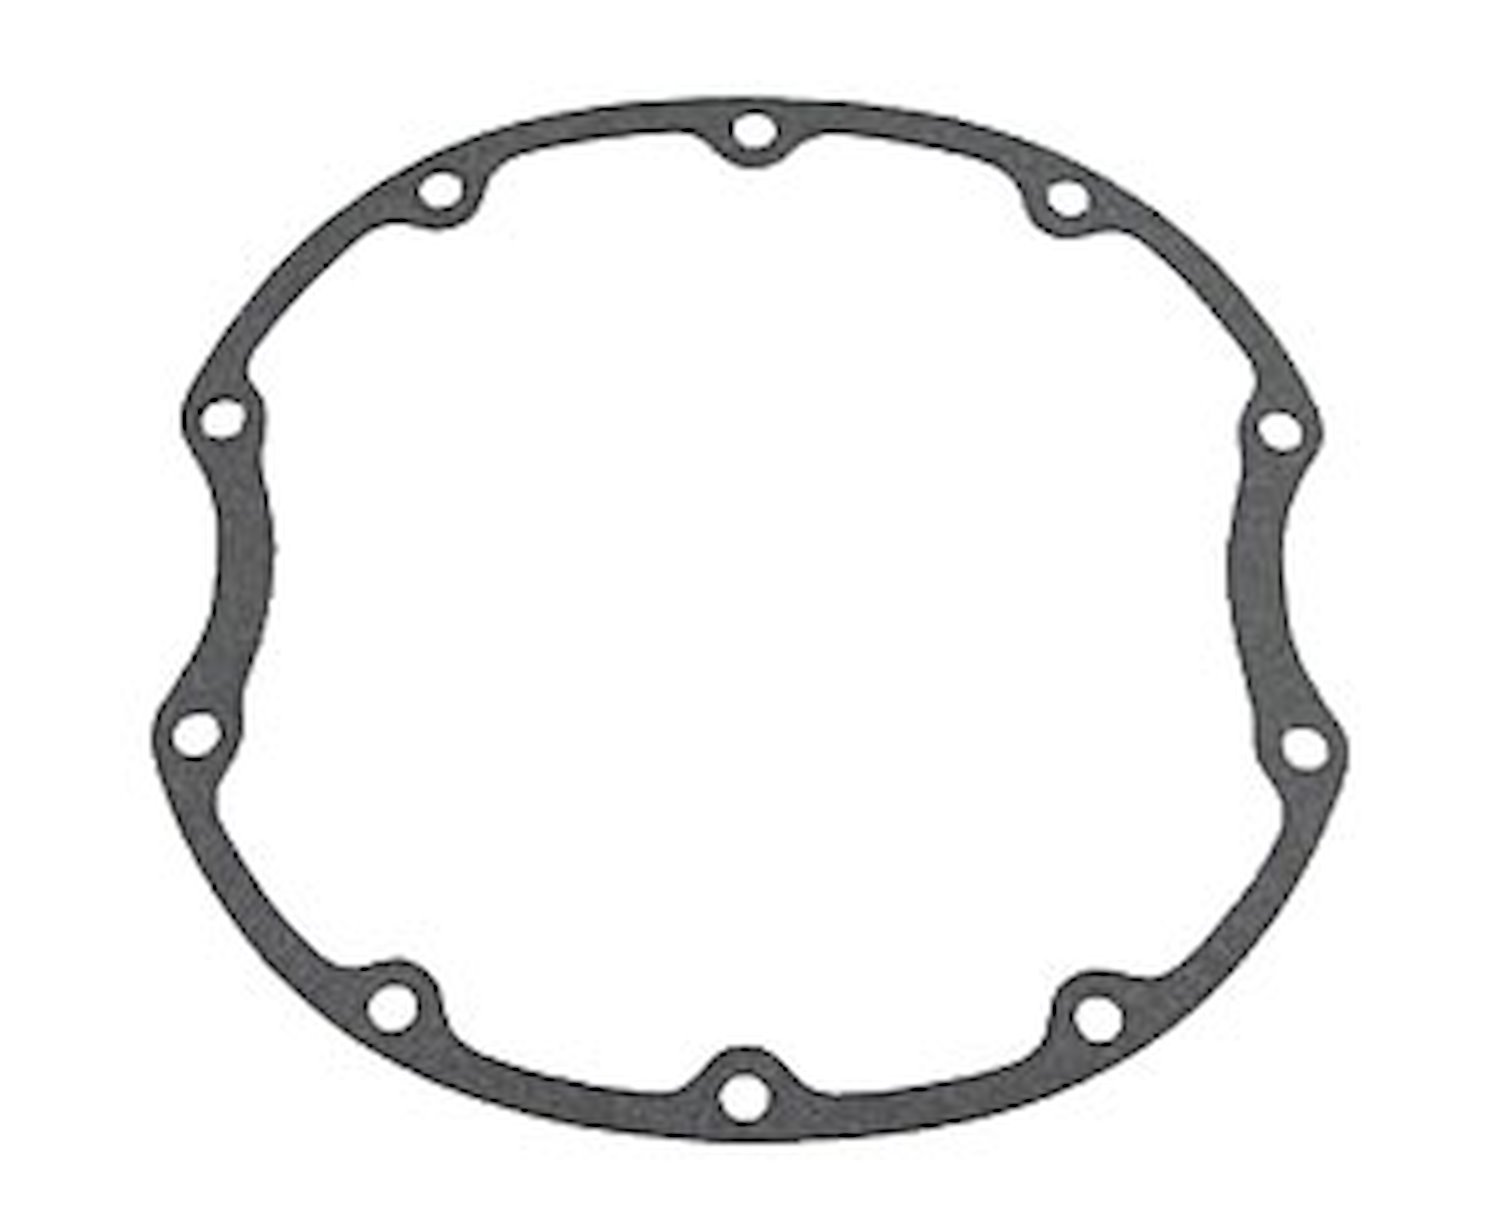 Differential Cover Gasket Most 1965-81 GM Passenger Cars